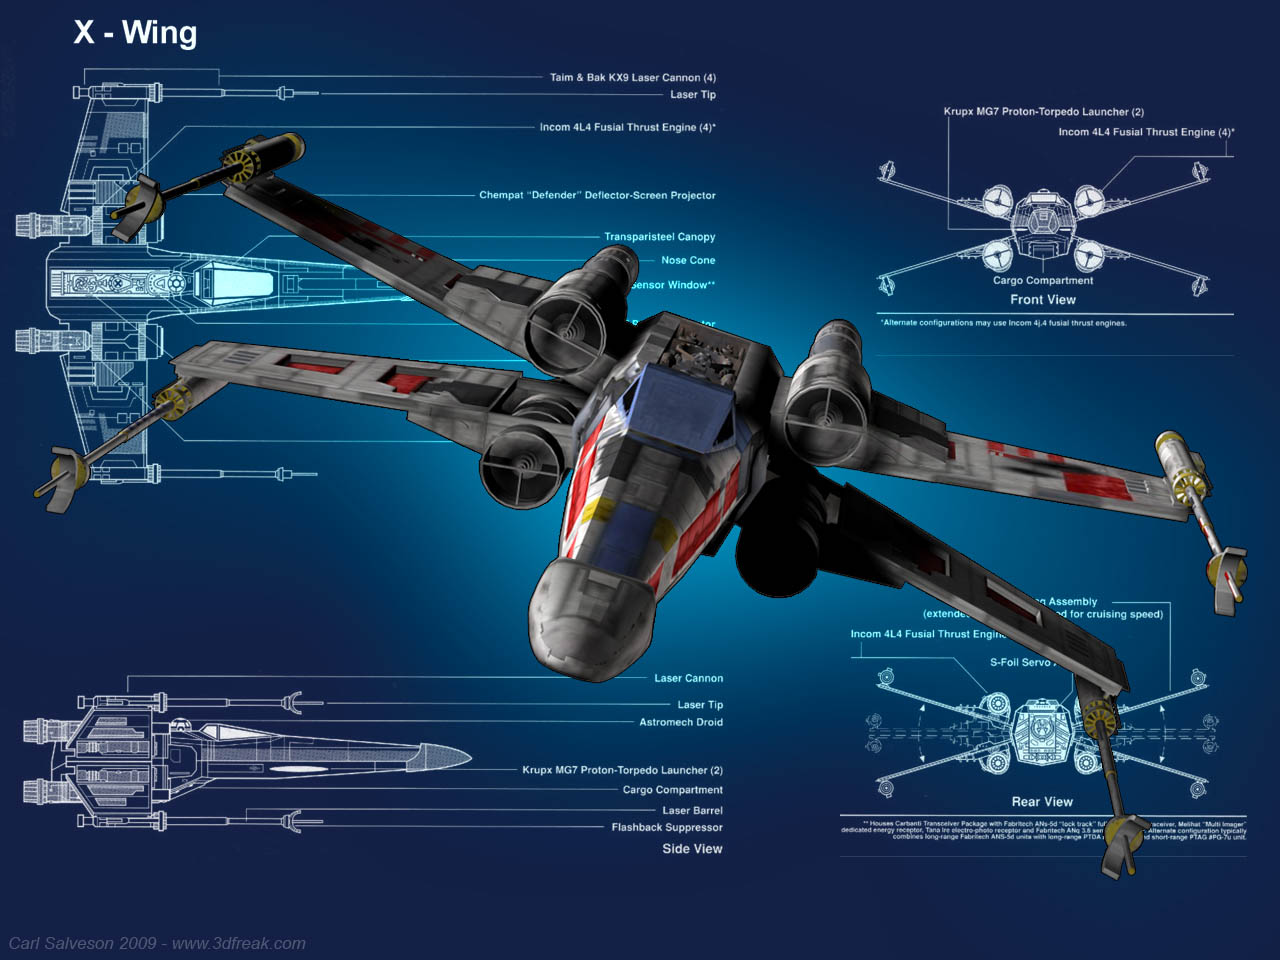 An X Wing A Great Little Wallpaper To Have On Your Laptop Or Pc